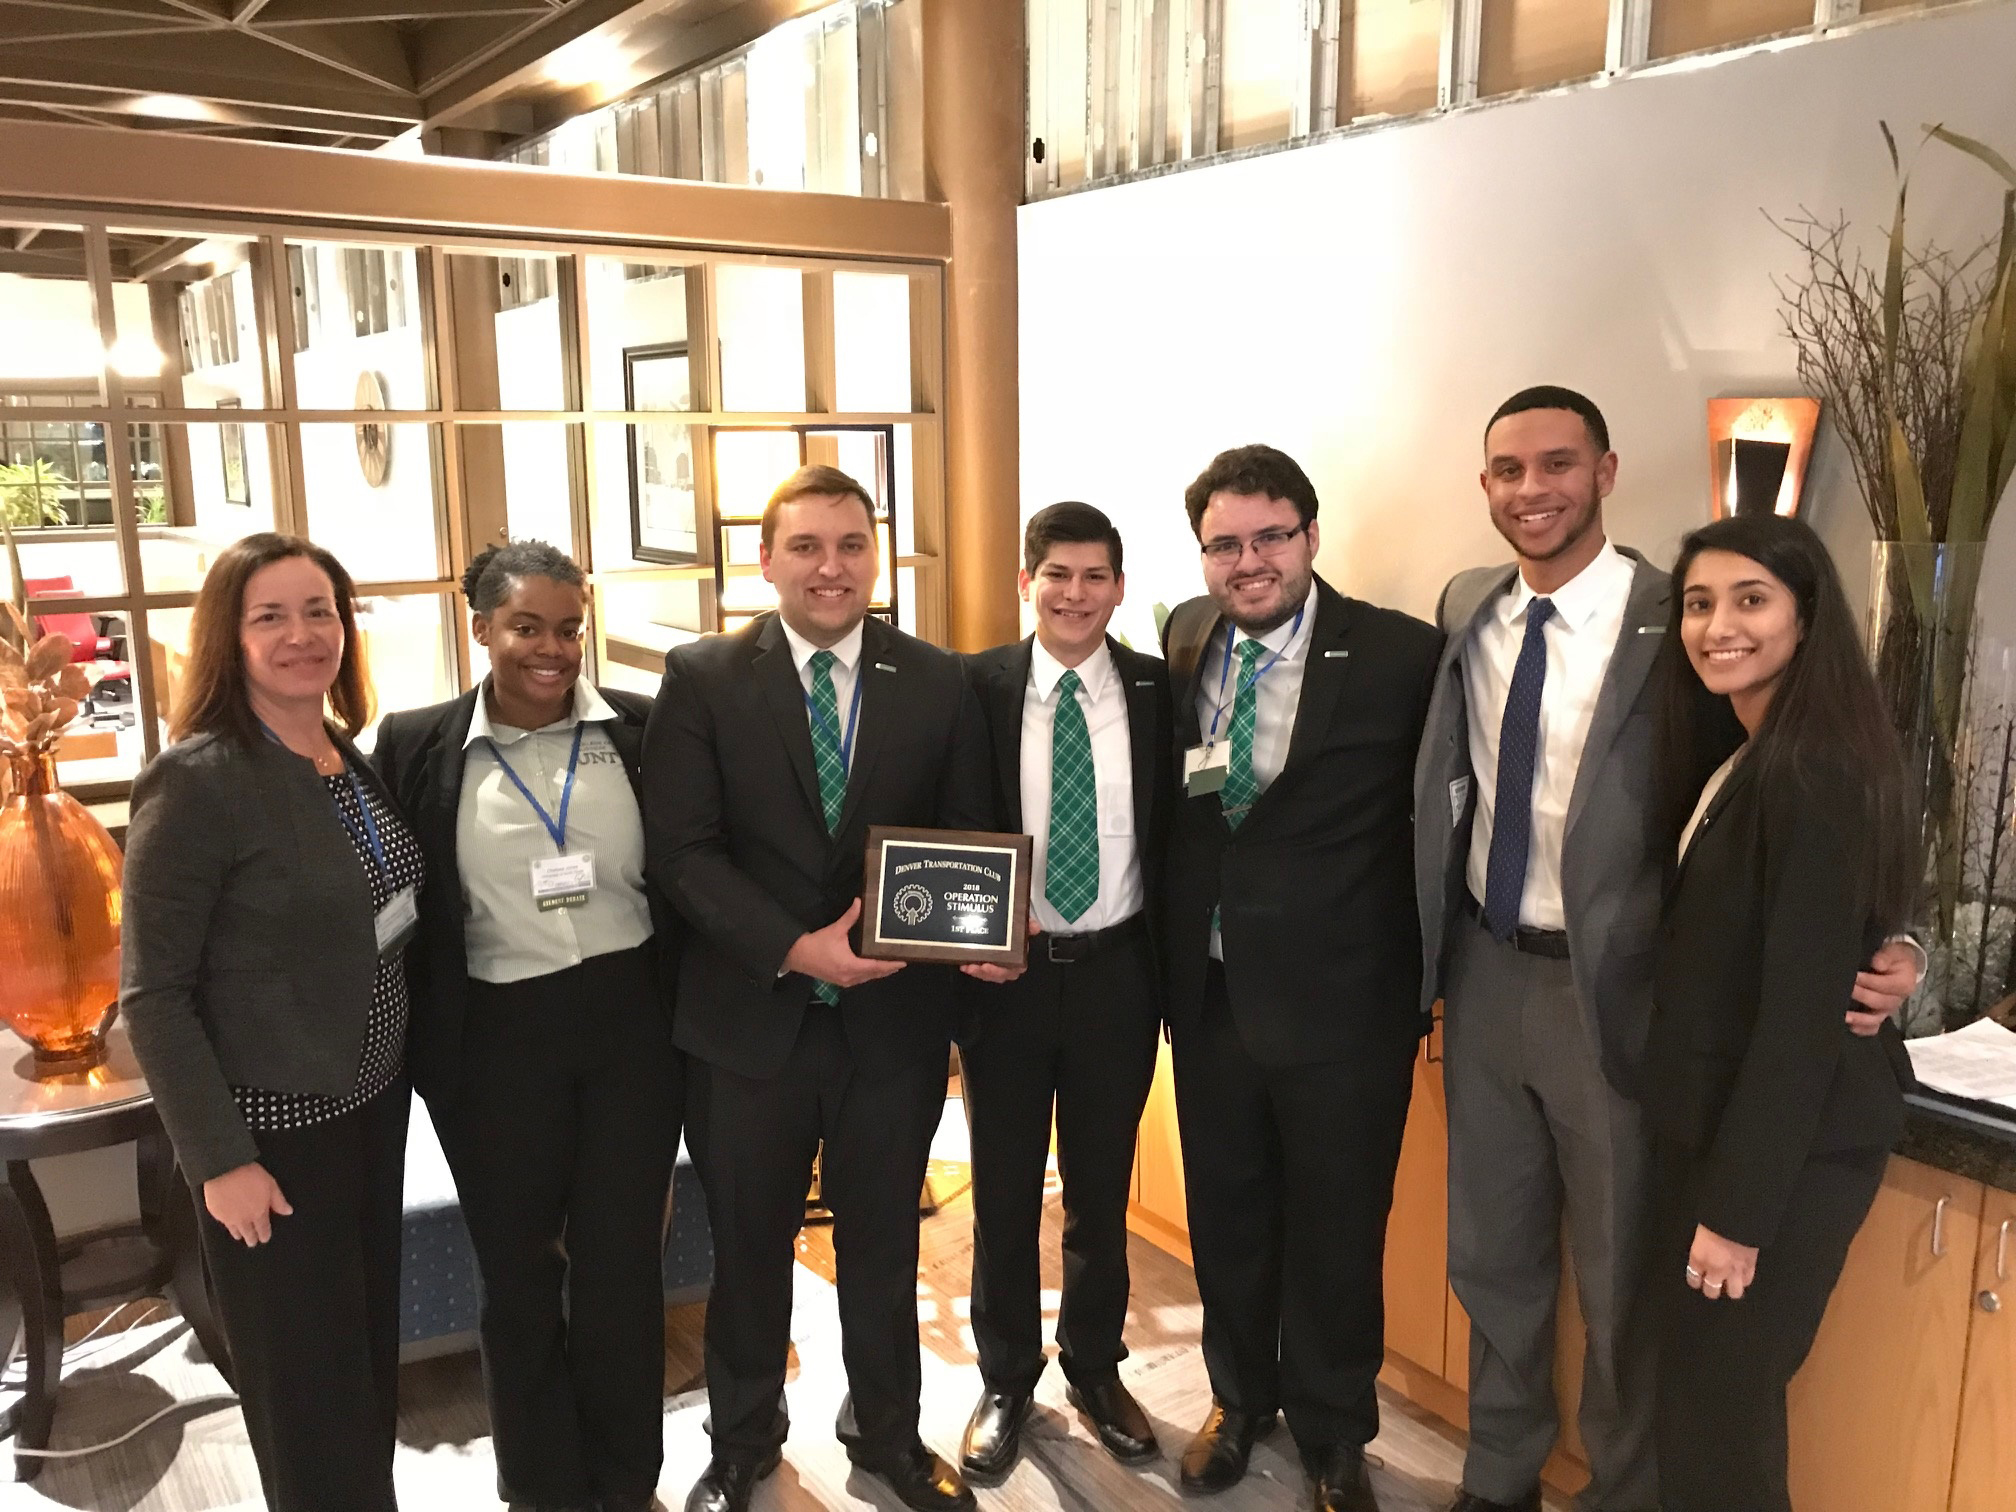 From left to right: Julie Willems-Espinoza, associate director of UNT's Center for Logistics Education and Research, and UNT logistics and supply chain management students Chelsea Jones, Woodrow Weaver, Carlos Castro, Joshua Intondi, Kristopher Henny and Pritti Gill.